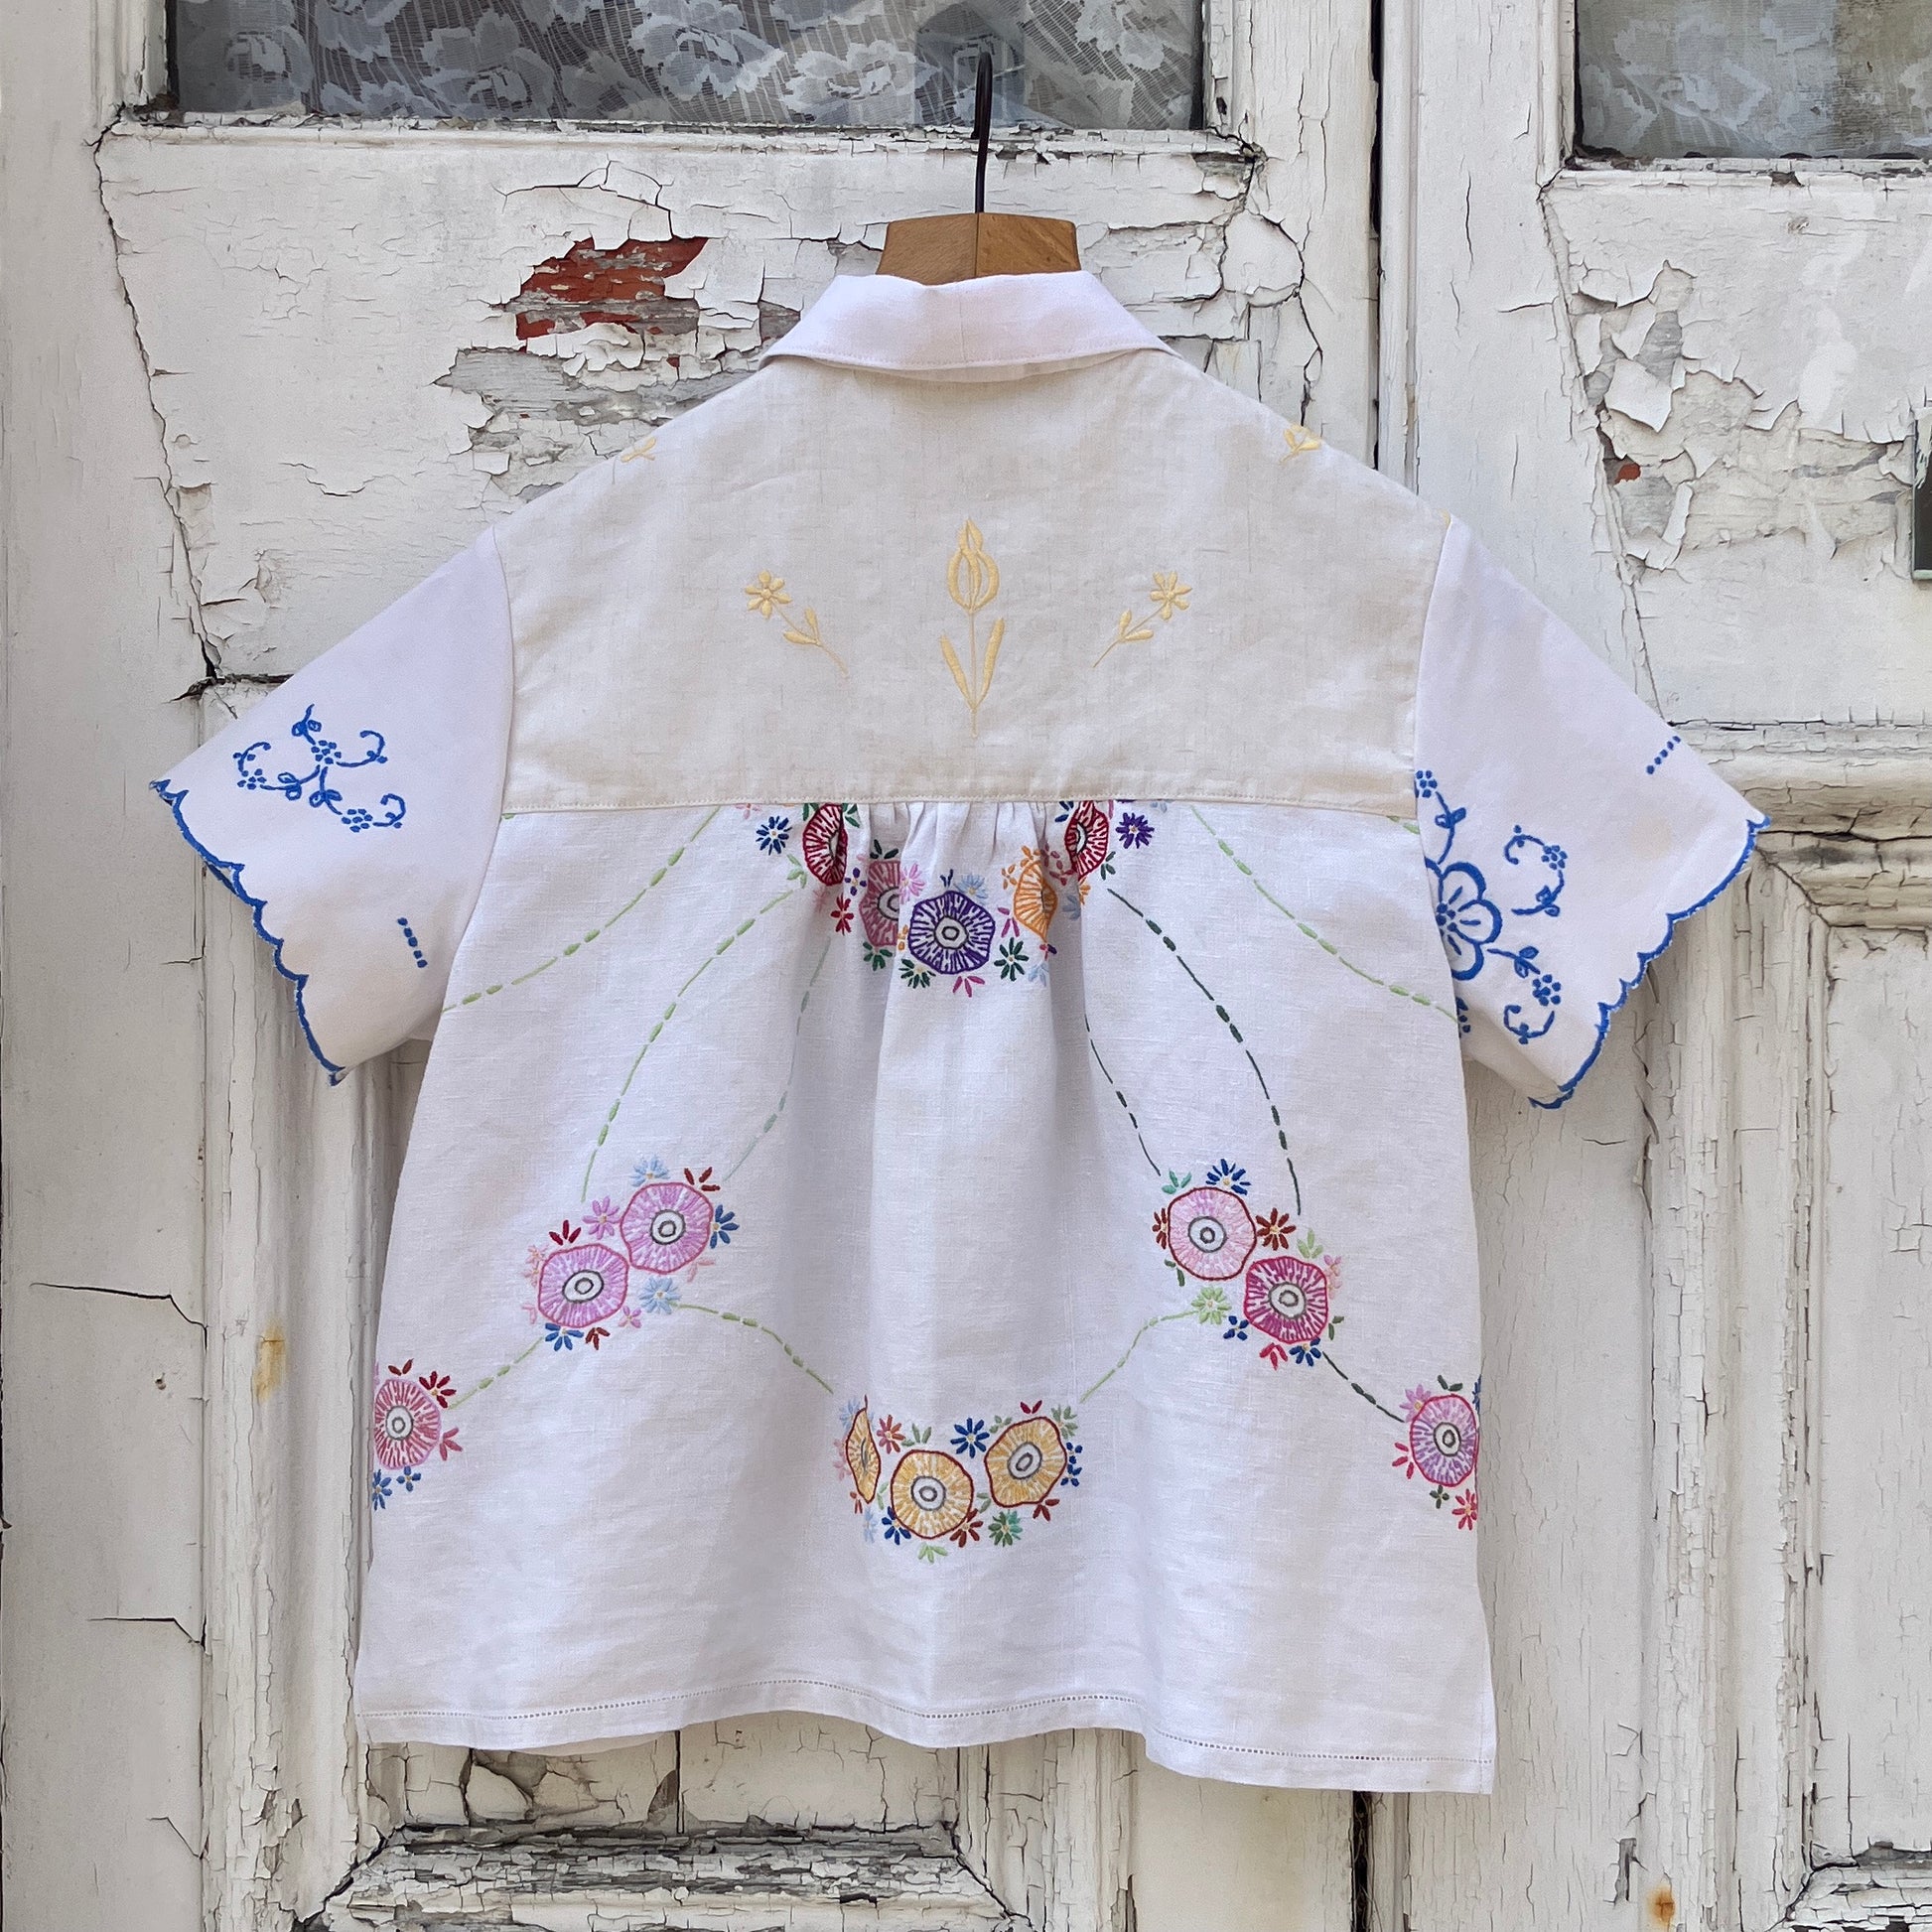 Short sleeved shirt made from a patchwork of reclaimed tablecloths with a traditional English pub with a thatched roof embroidered on the front and two bows on the yoke (bank view)